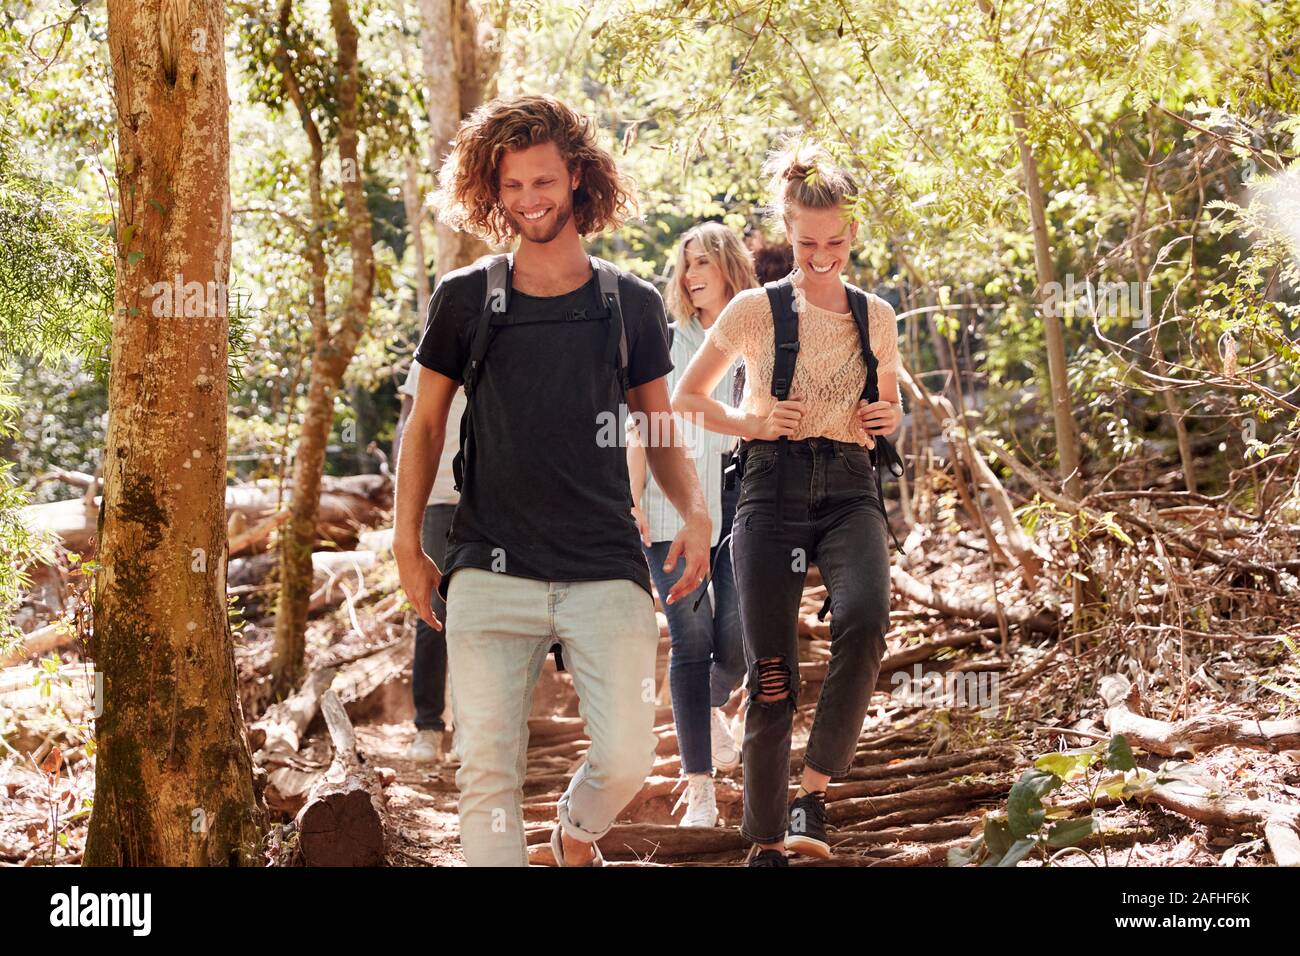 Millennial friends hiking together downhill on a forest trail, full length Stock Photo